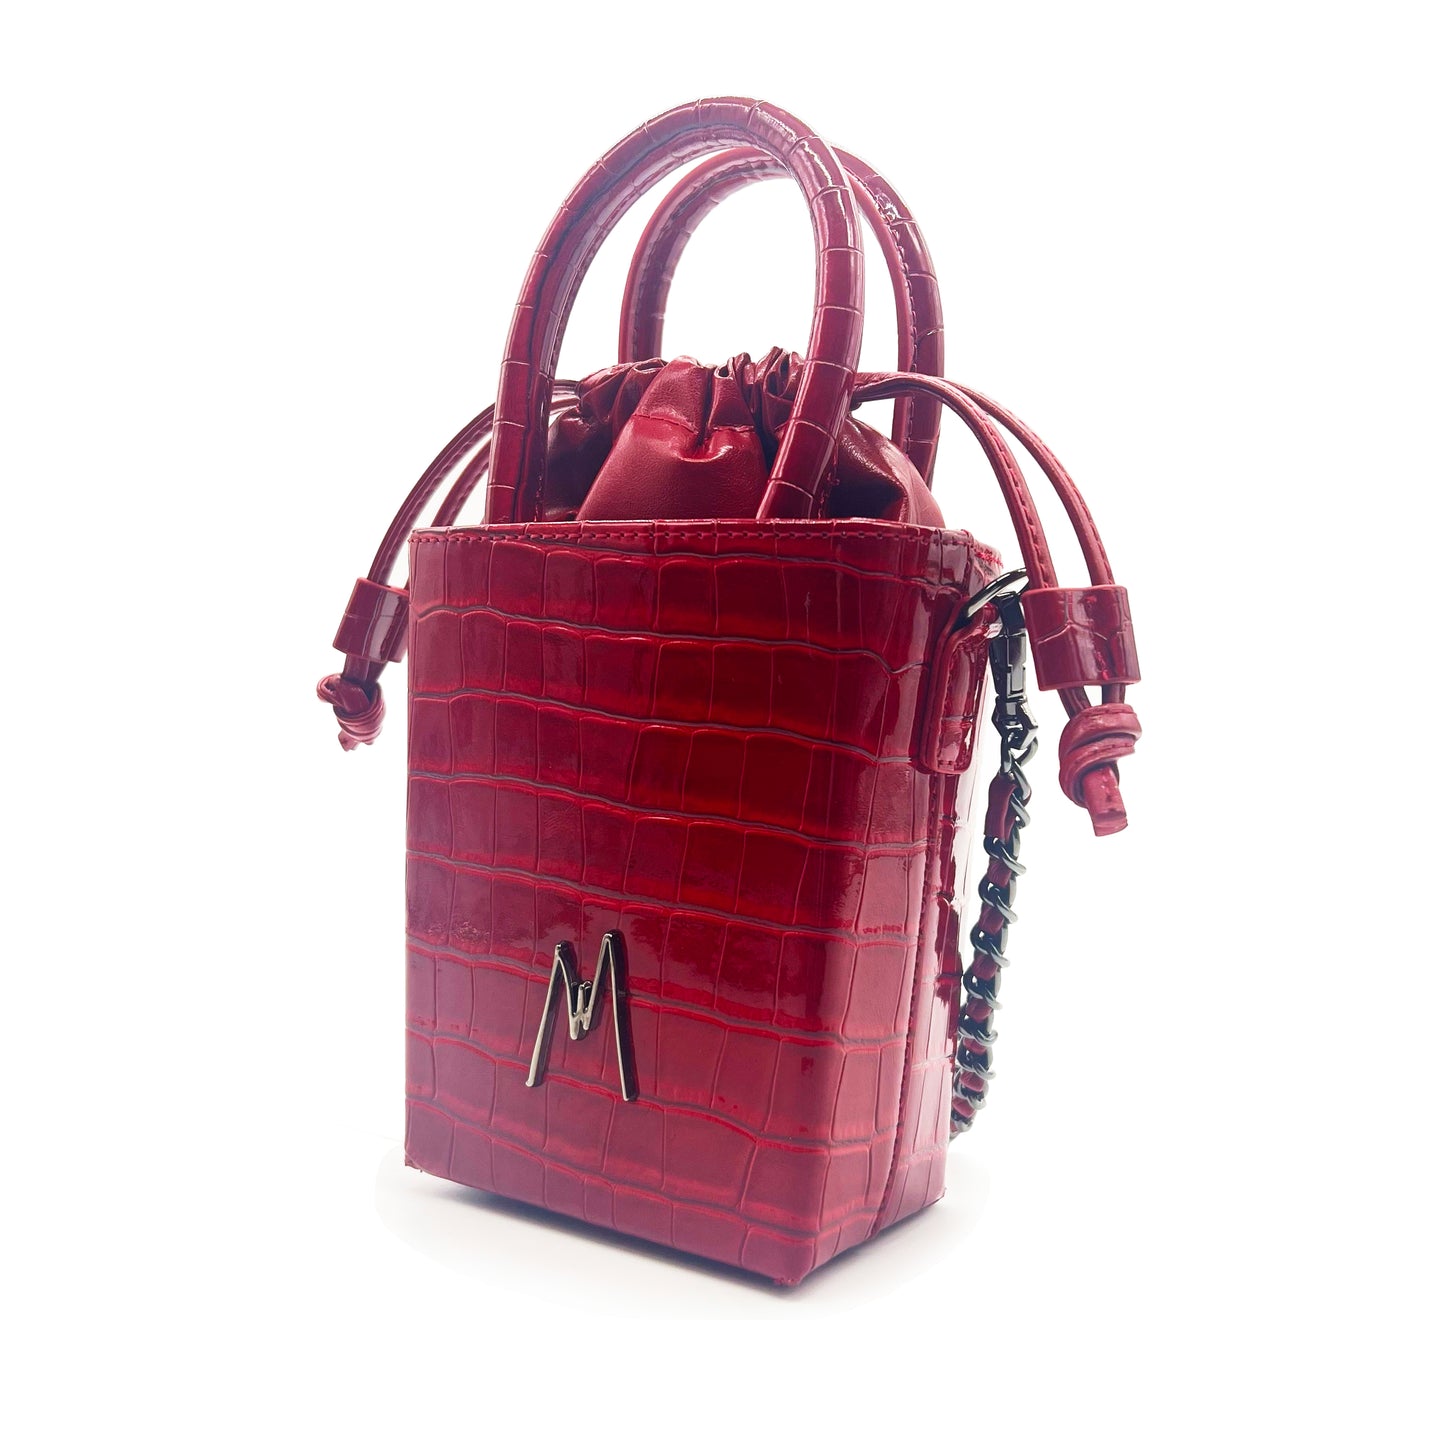 "SMALL LEATHER TOTE"  CROCODILE EMBOSSED - CRANBERRY RED